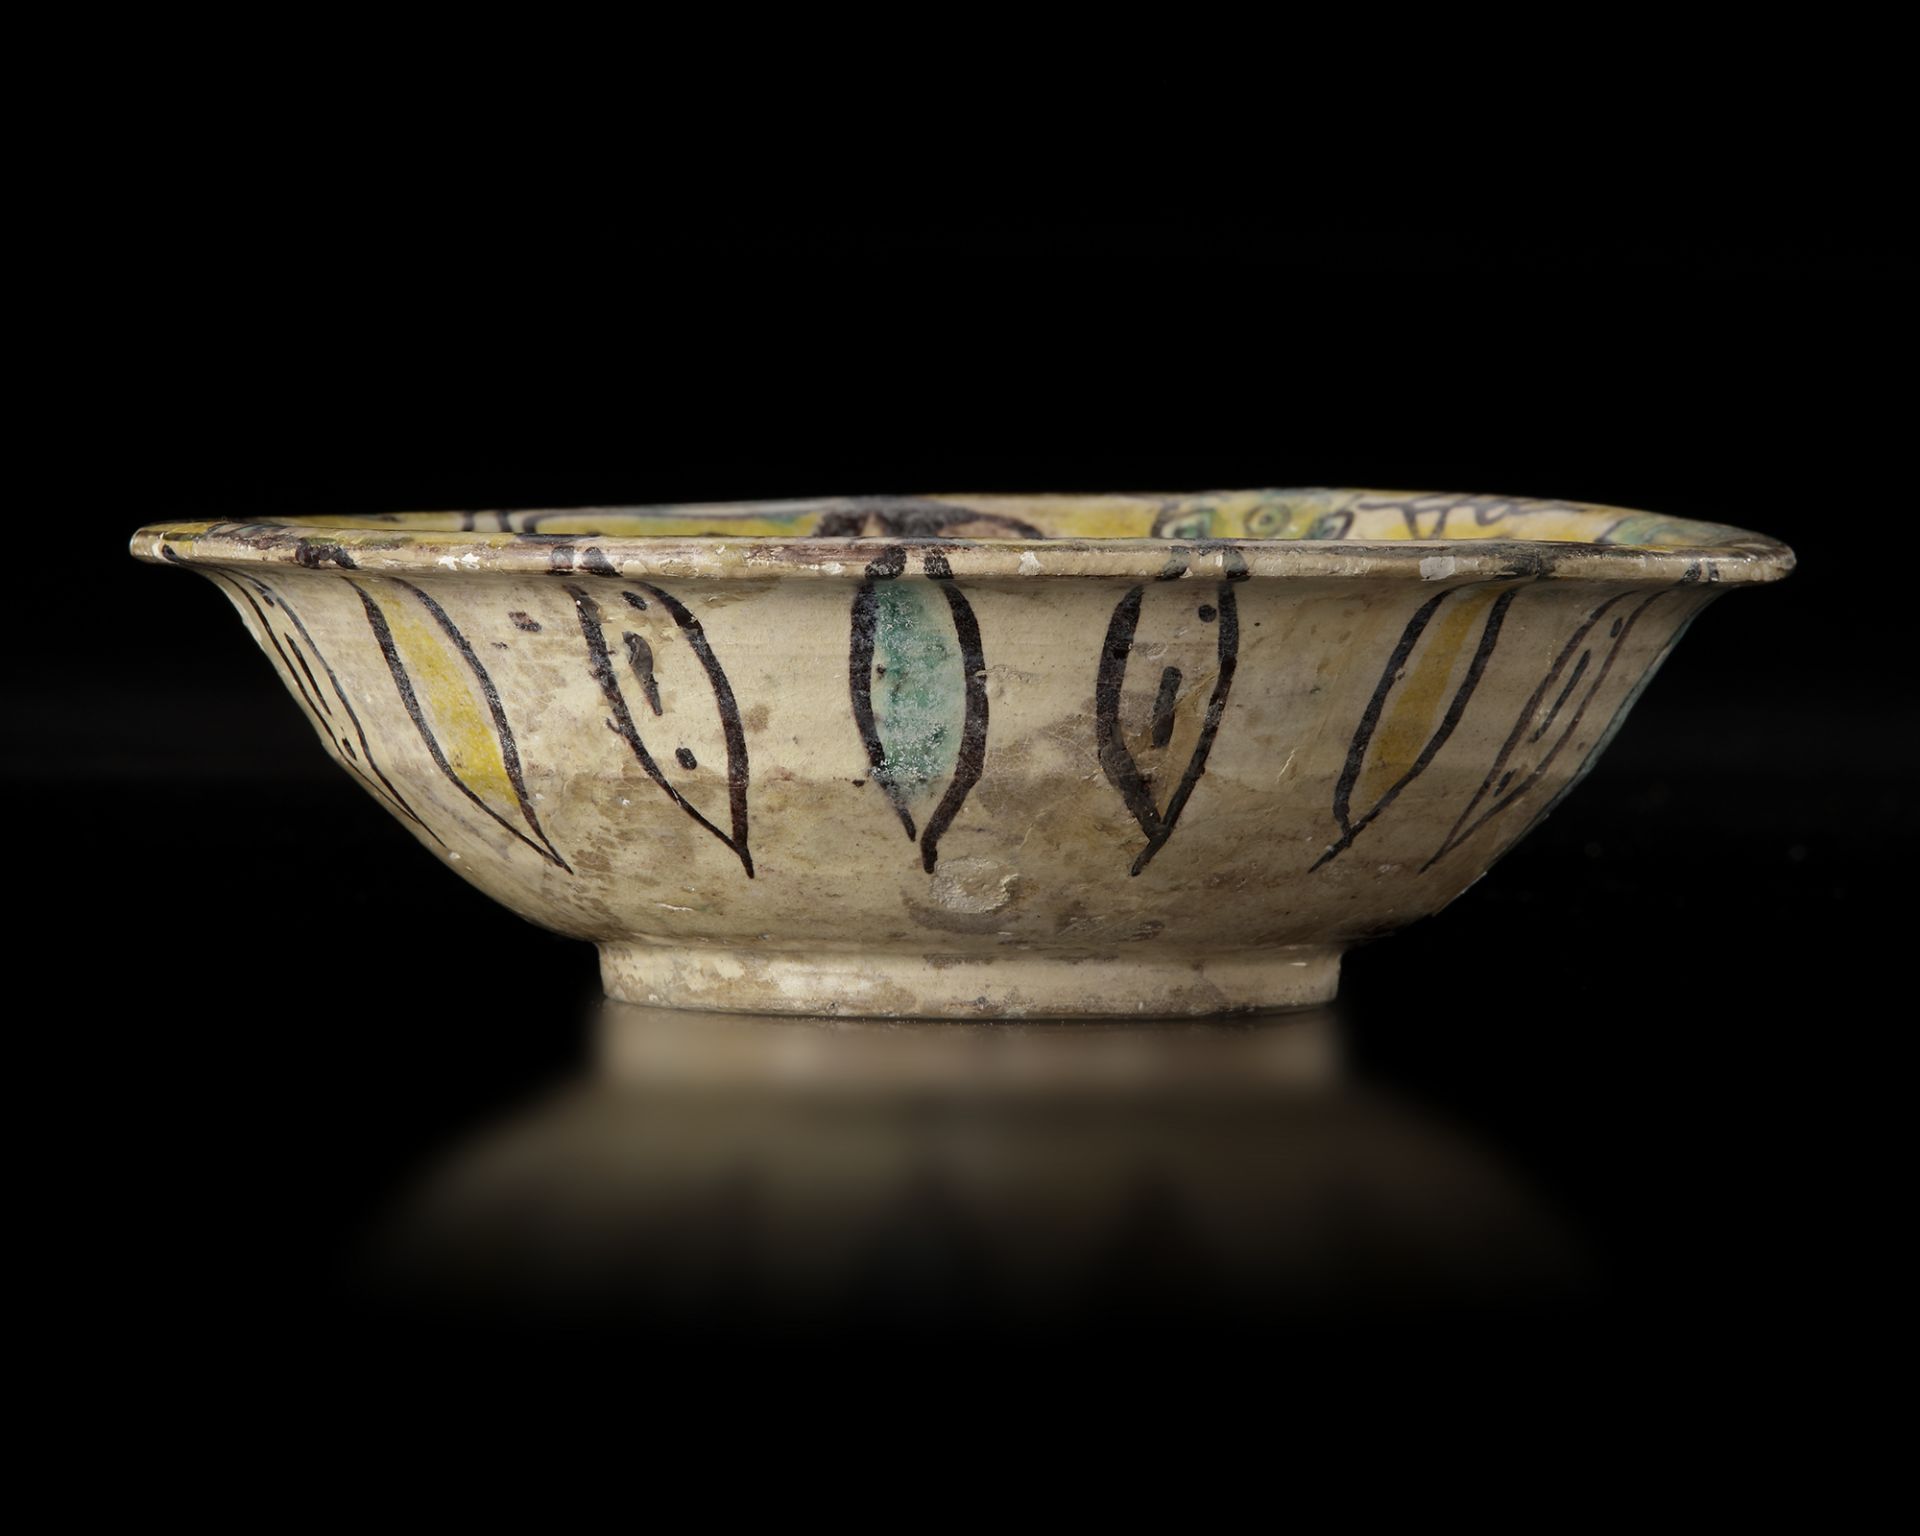 A NISHAPUR POLYCHROME DECORATED BOWL, PERSIA, 10TH CENTURY - Image 2 of 4